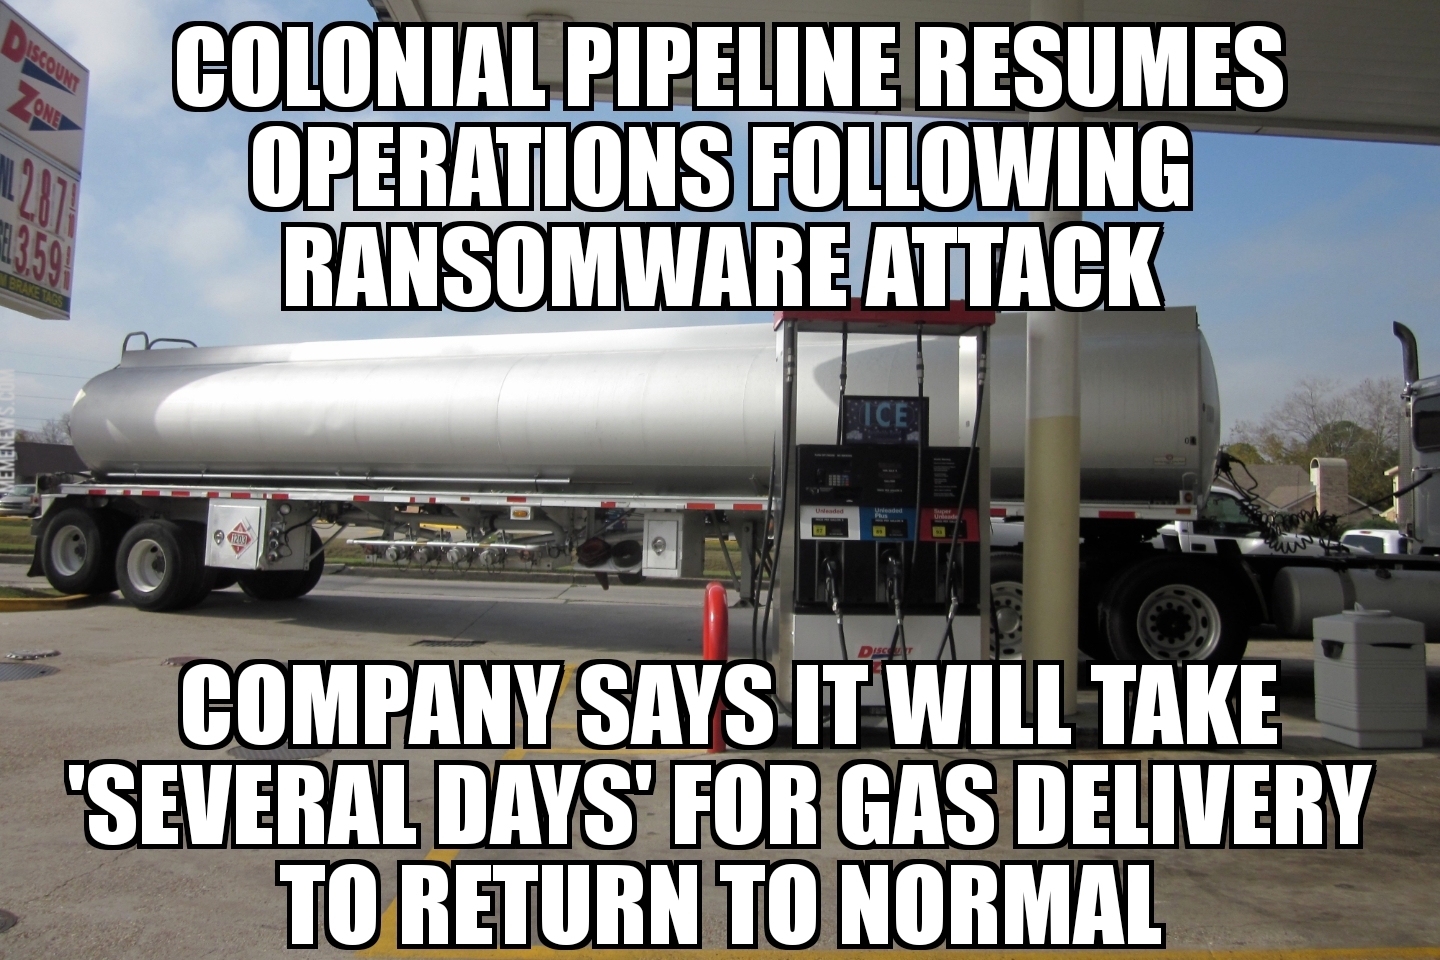 Colonial Pipeline resumes operations